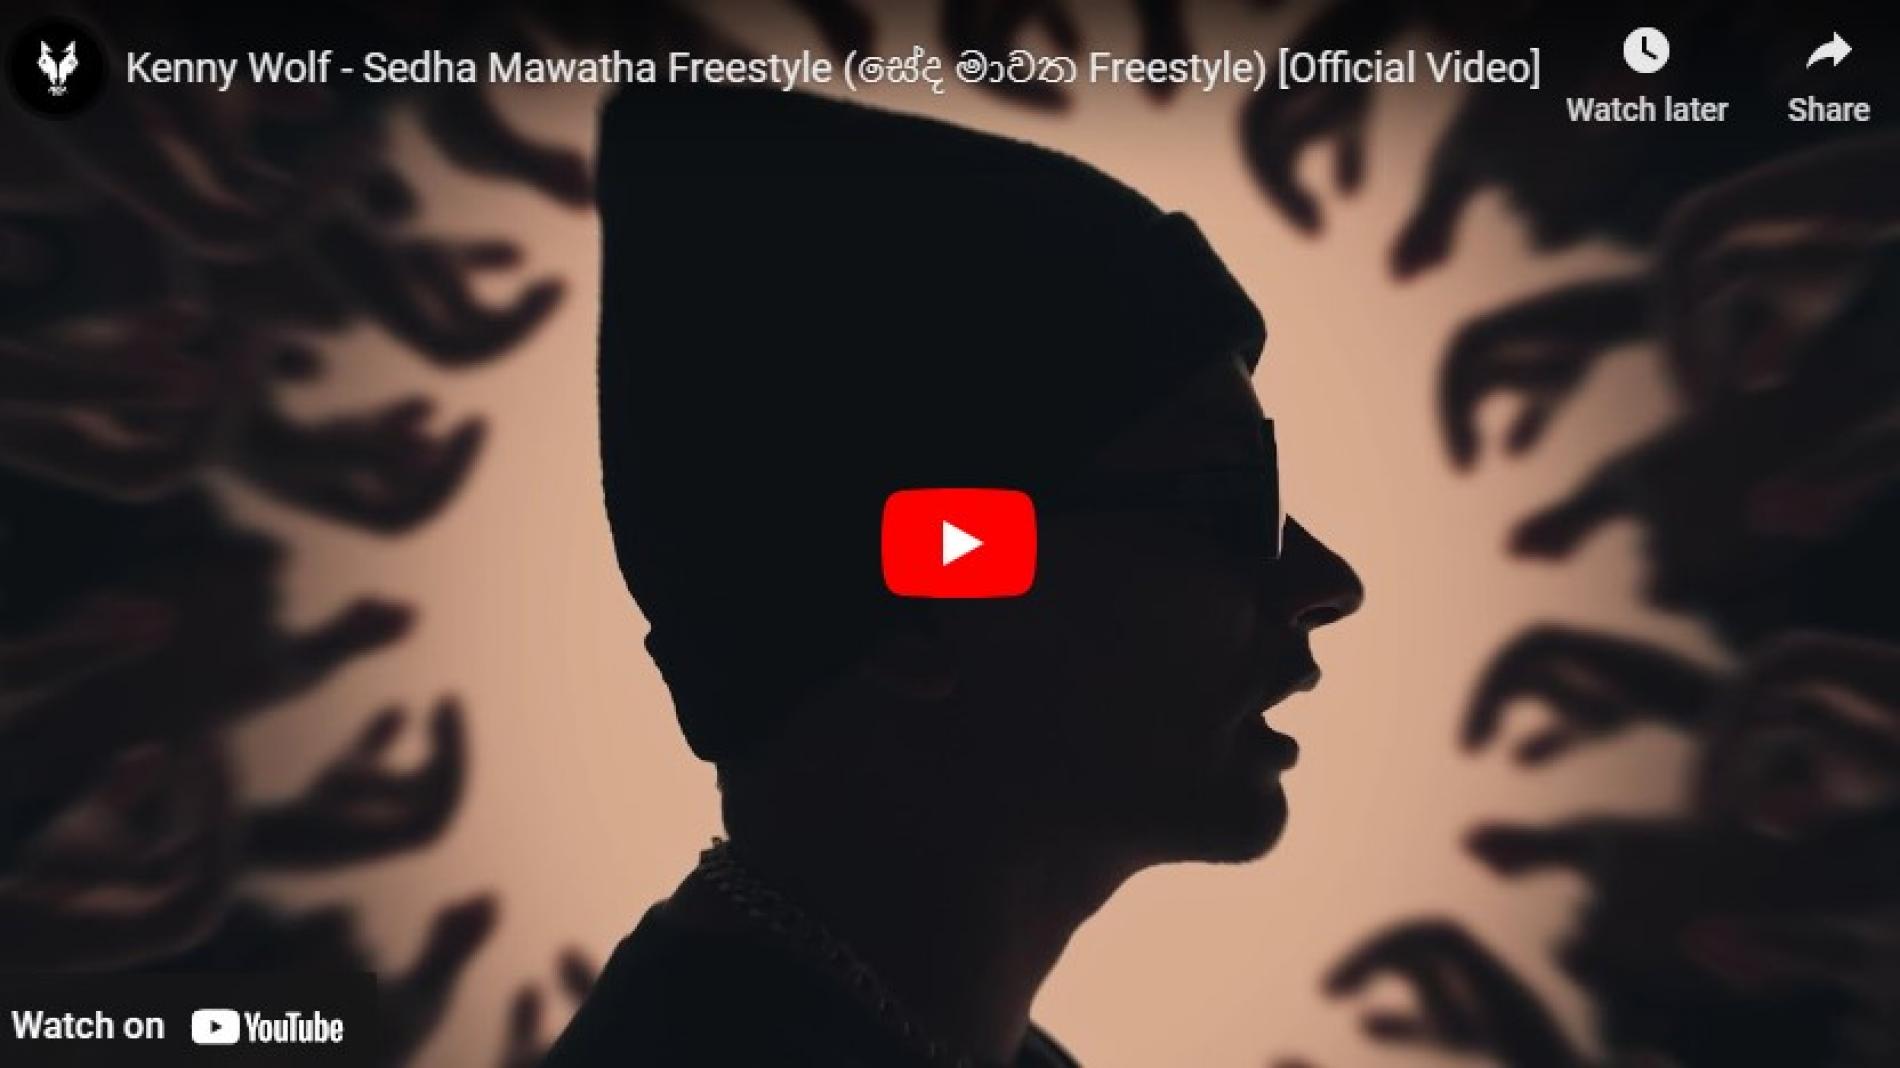 New Music : Kenny Wolf – Sedha Mawatha Freestyle (සේද මාවත Freestyle) [Official Video]